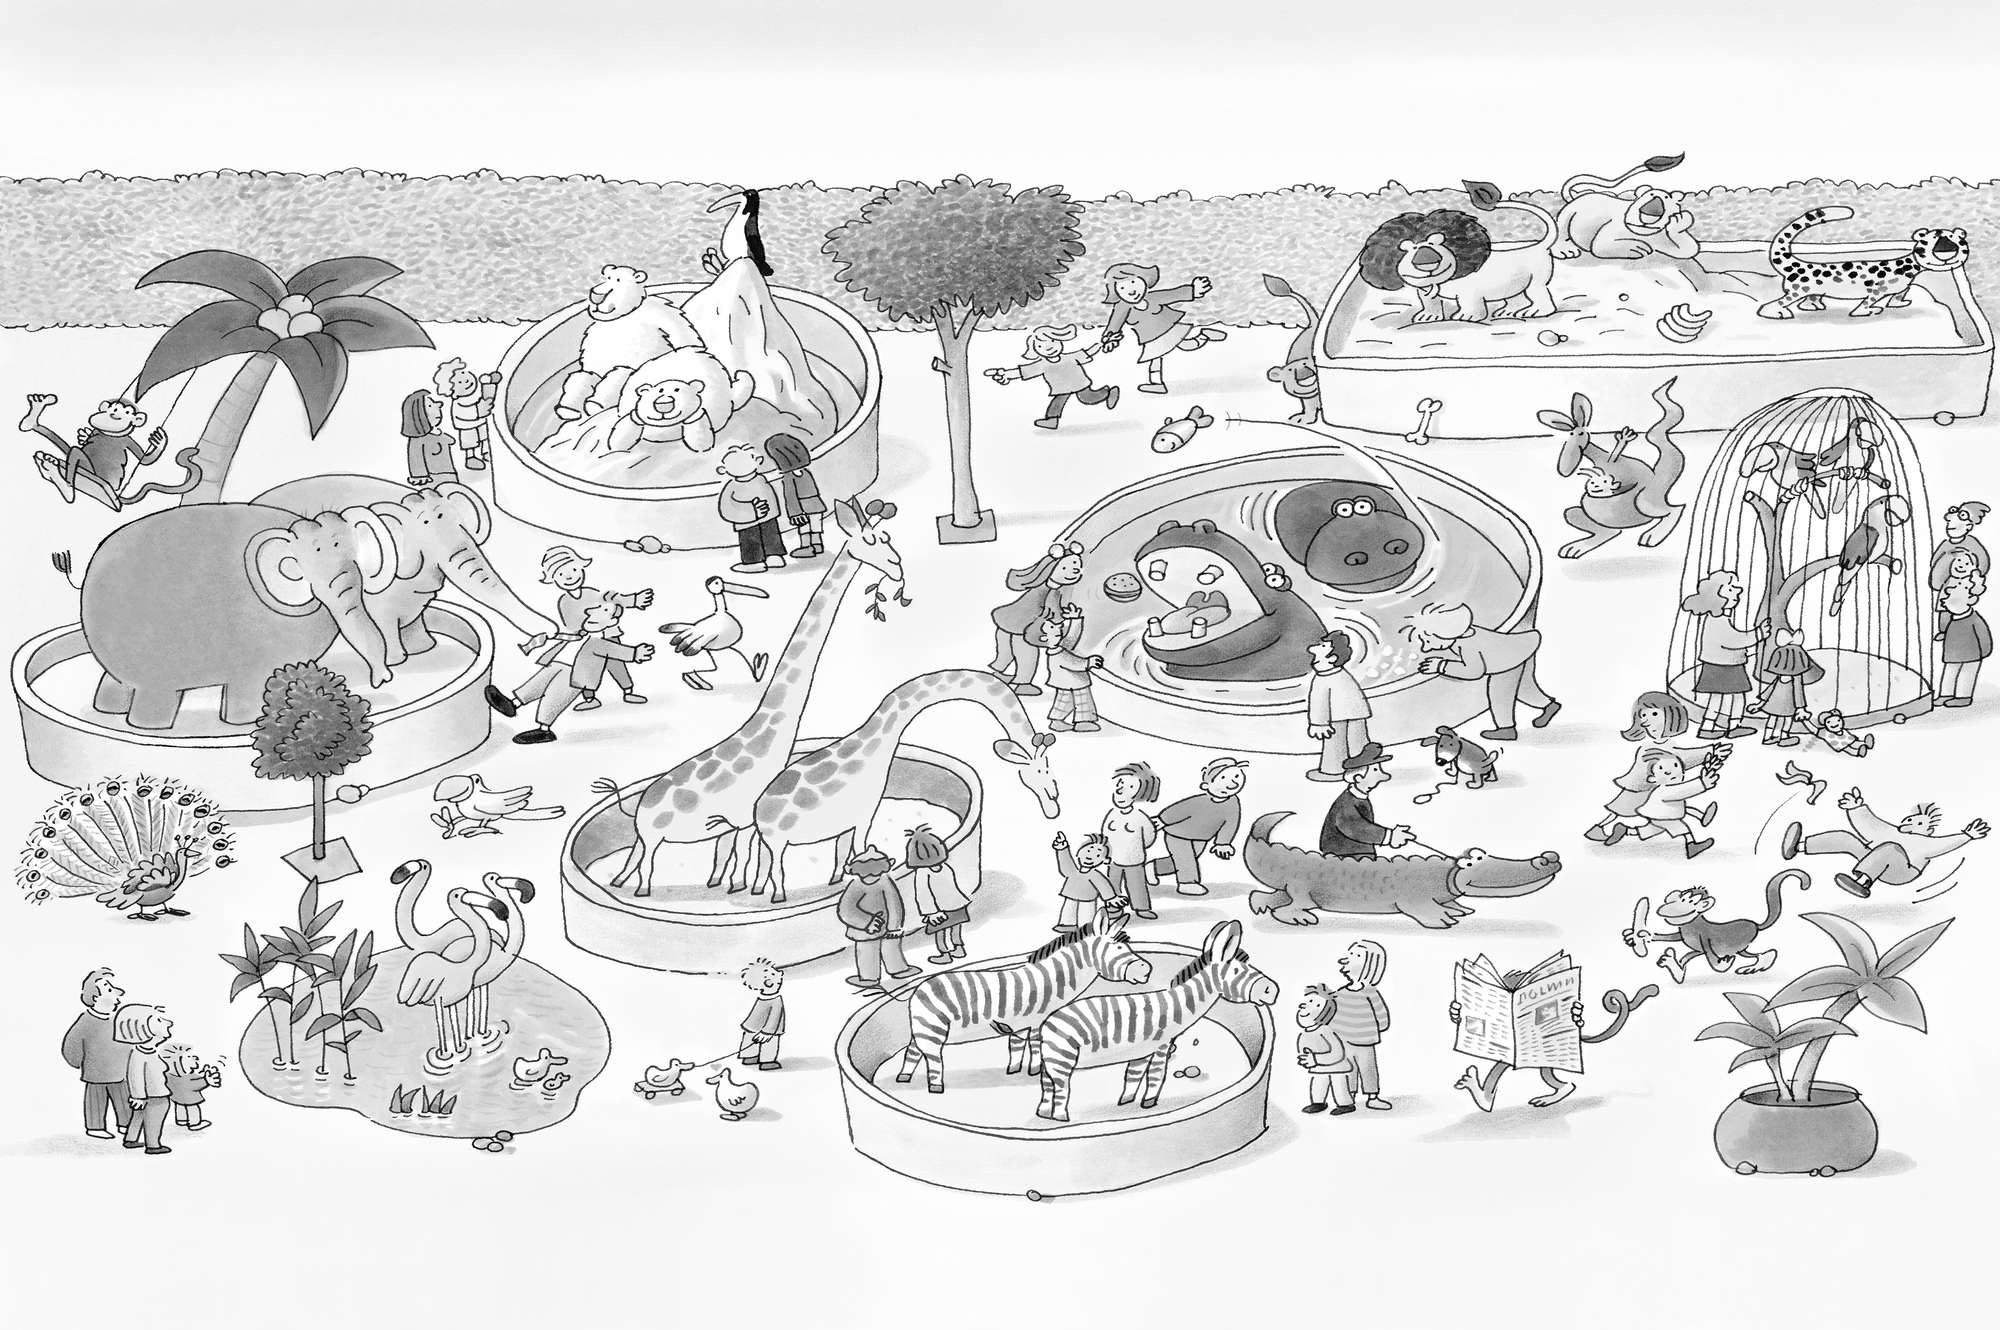             Kids mural zoo drawing in black white on premium smooth nonwoven
        